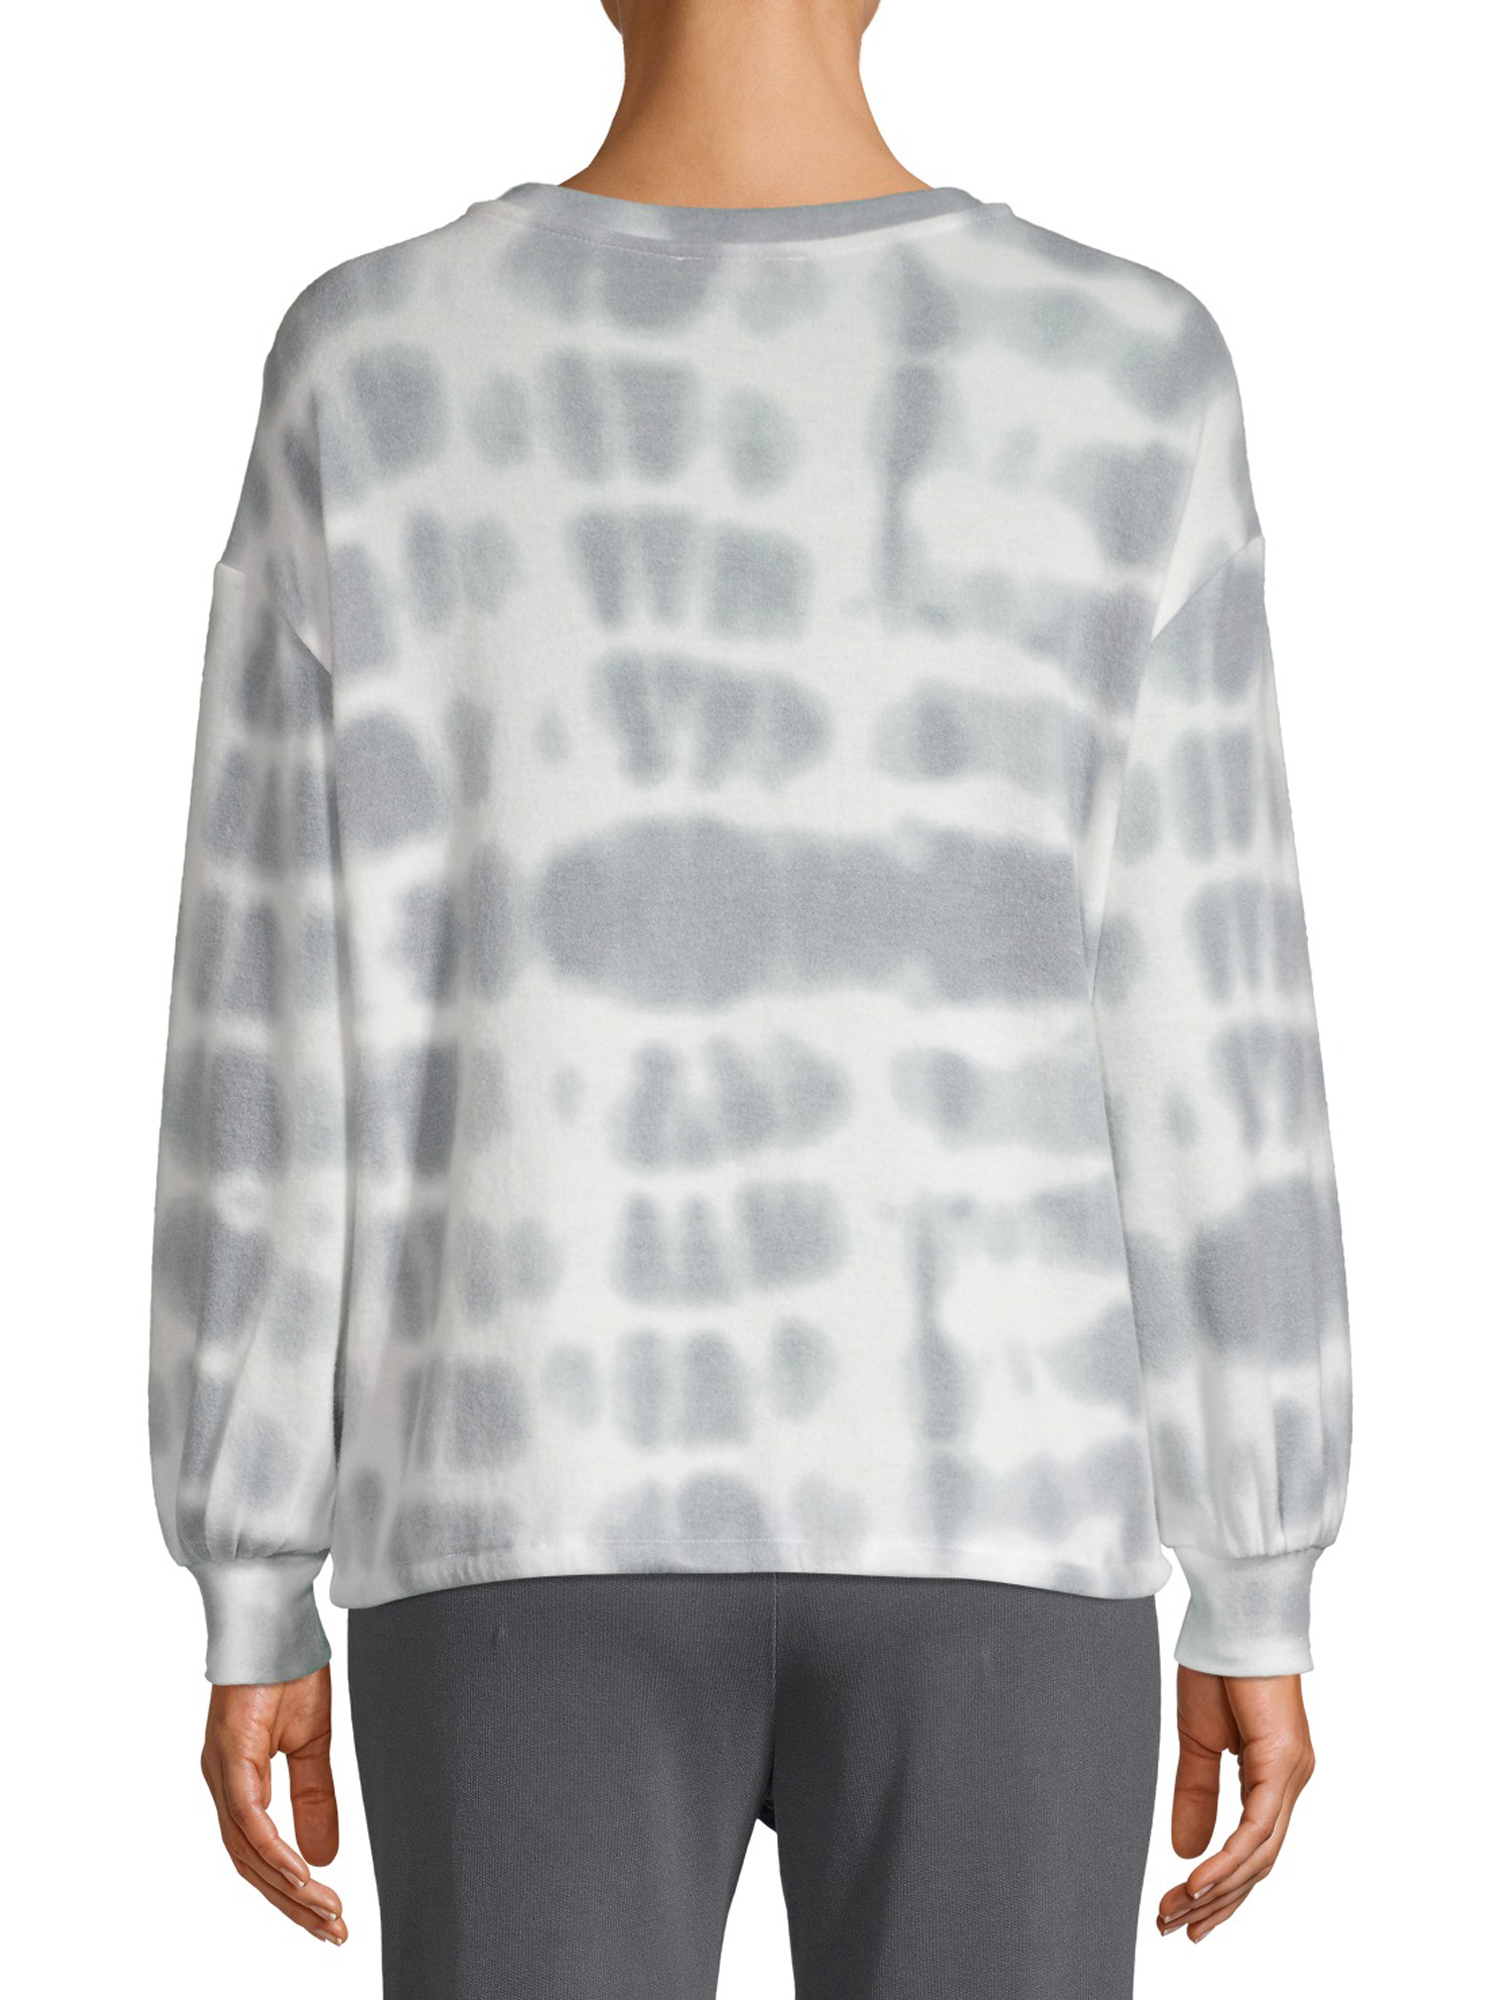 Como Blu Women's Athleisure Hacci Tie Dye Pullover with Drawstring - image 3 of 6